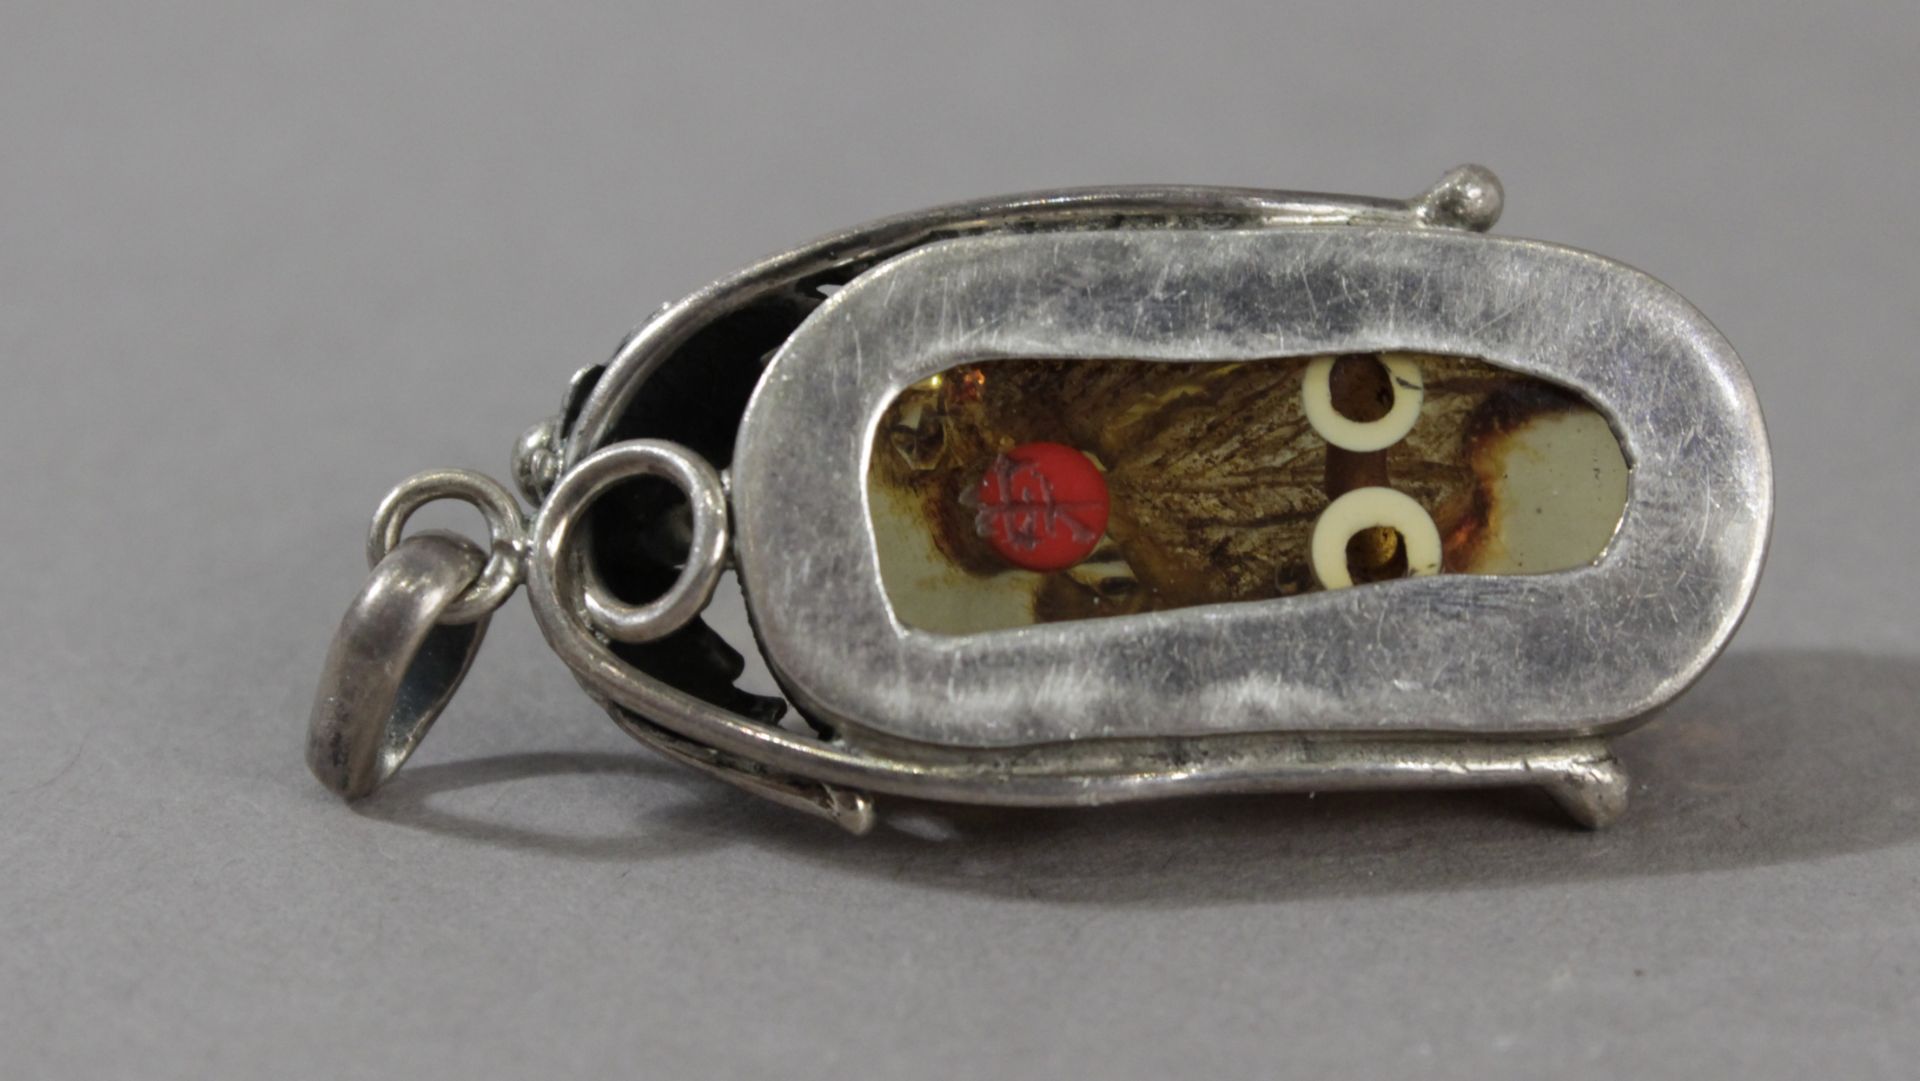 A19th century Japanese amber and silver pendant form Meiji period - Image 4 of 4